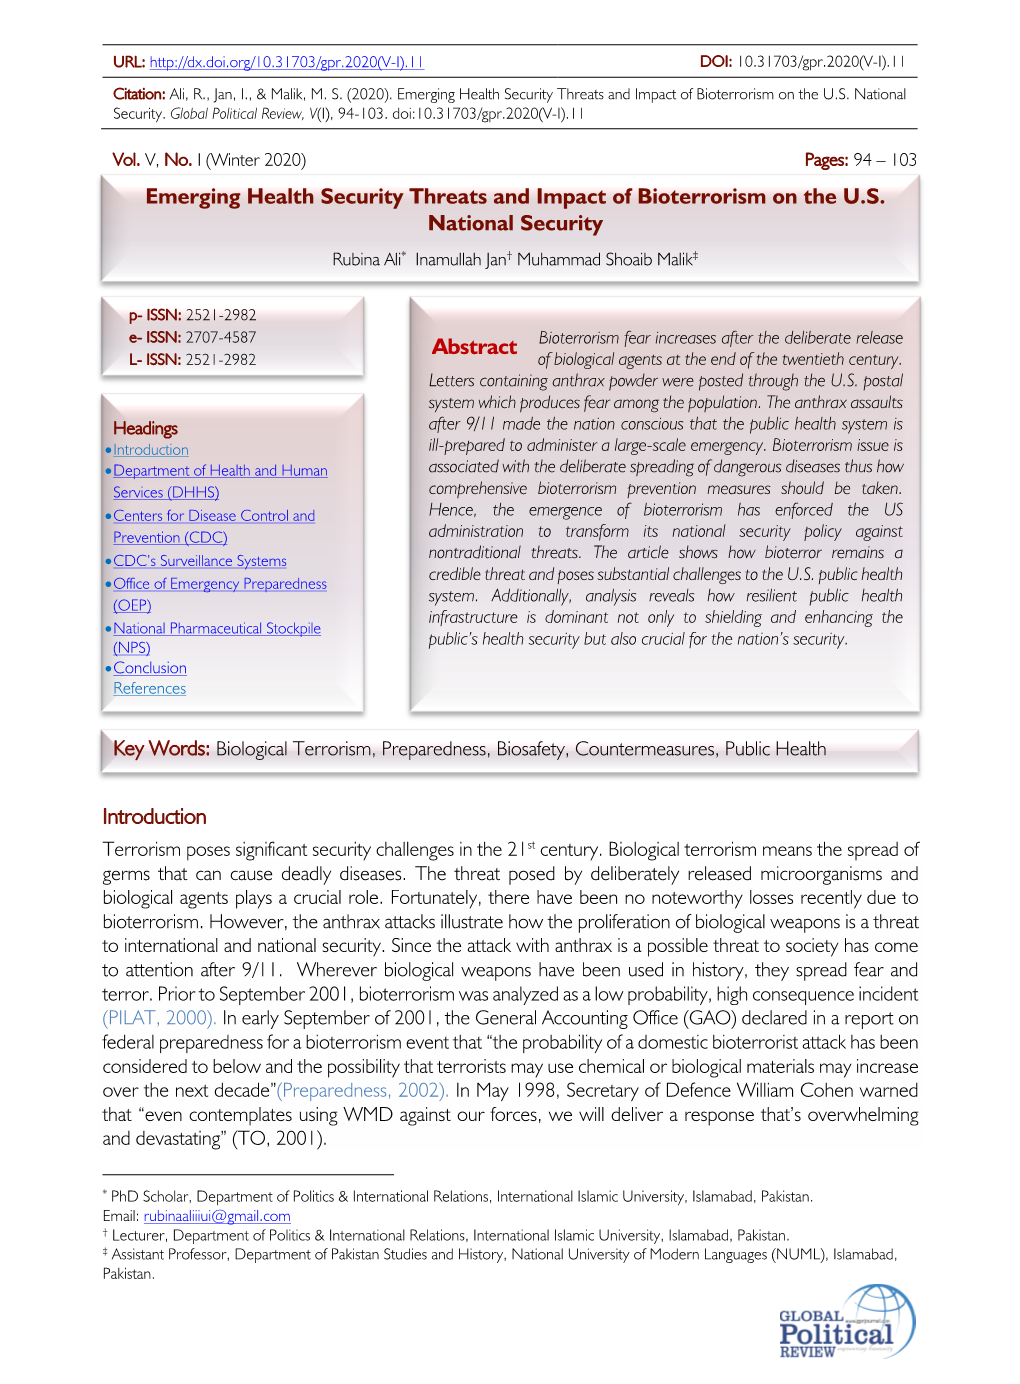 Emerging Health Security Threats and Impact of Bioterrorism on the U.S. National Security